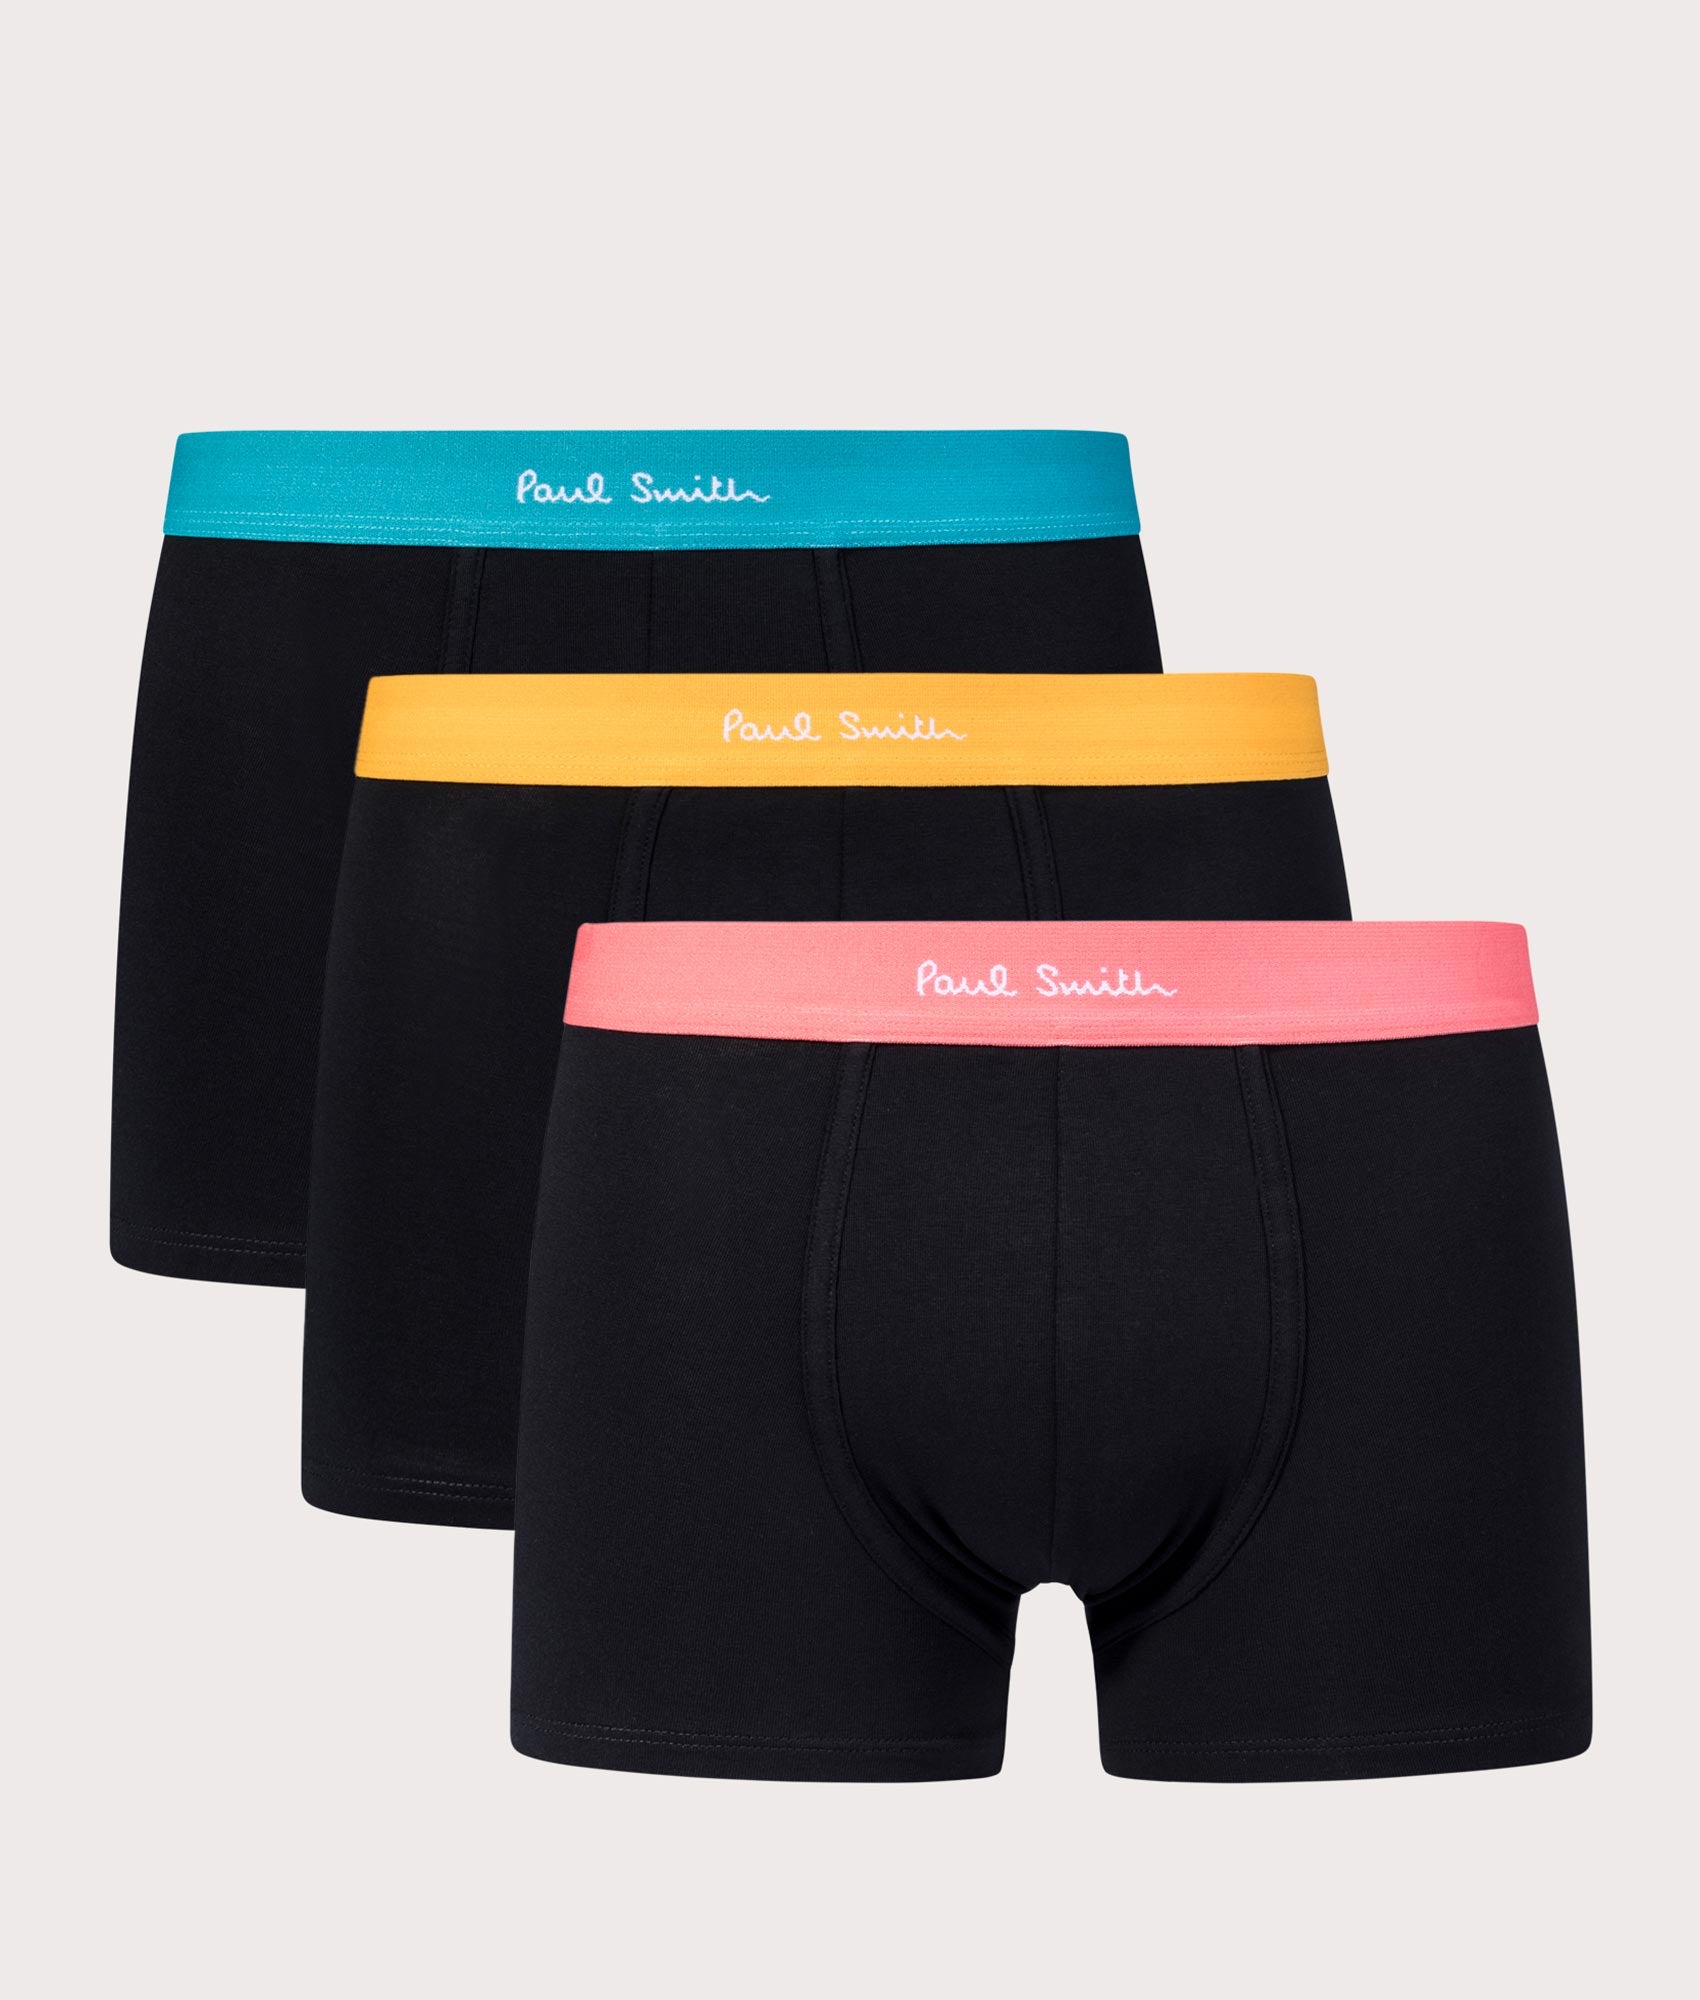 PS Paul Smith Mens 3 Pack Art Band Trunks - Colour: 79 Black - Size: Large